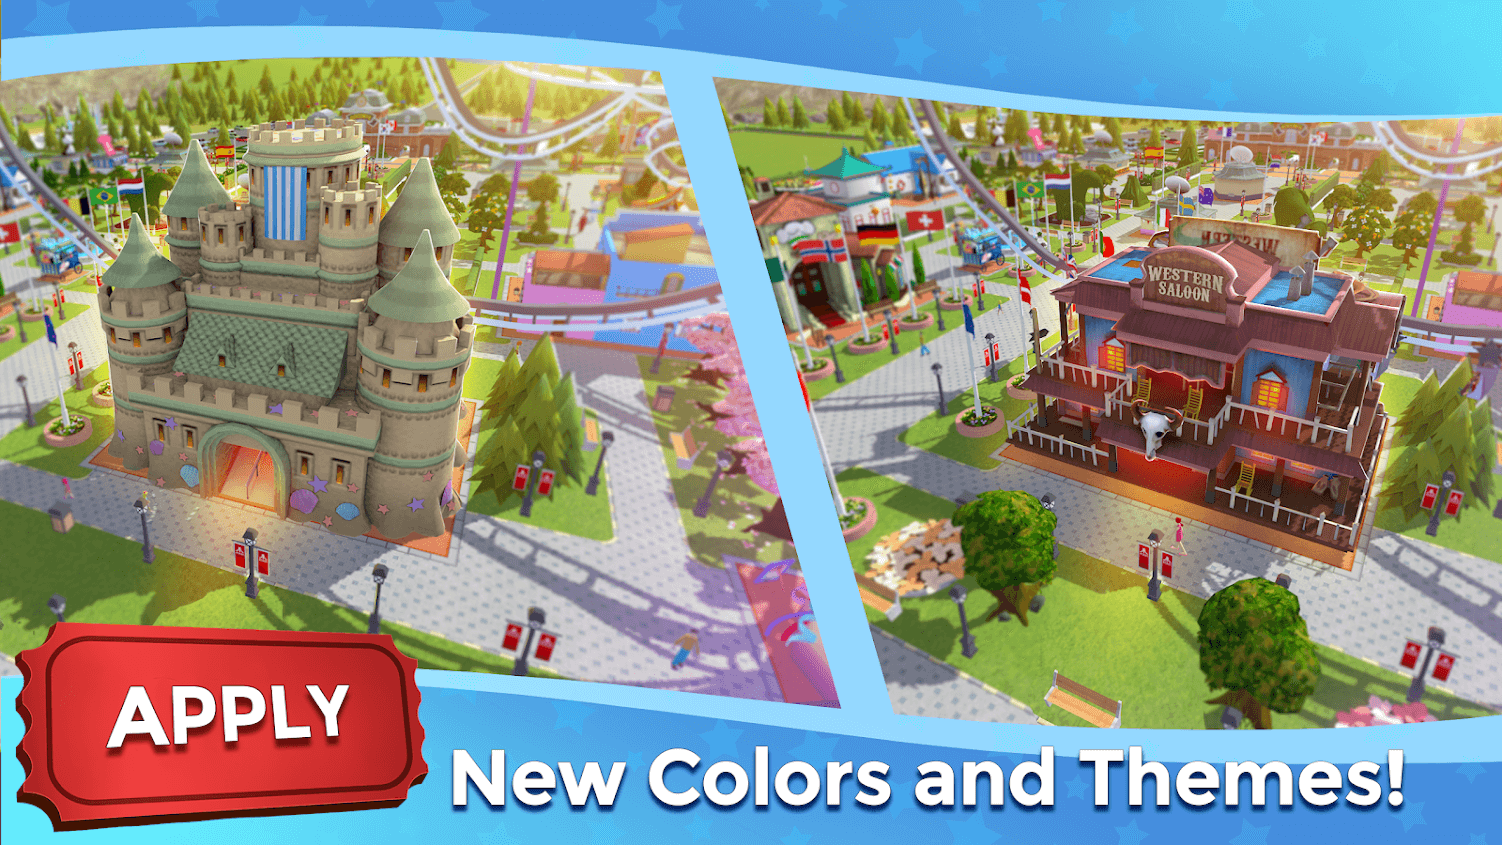 RCTW - Blog #12 - Nvizzio Creations Named Developer of RCTW - RollerCoaster  Tycoon - The Ultimate Theme park Sim